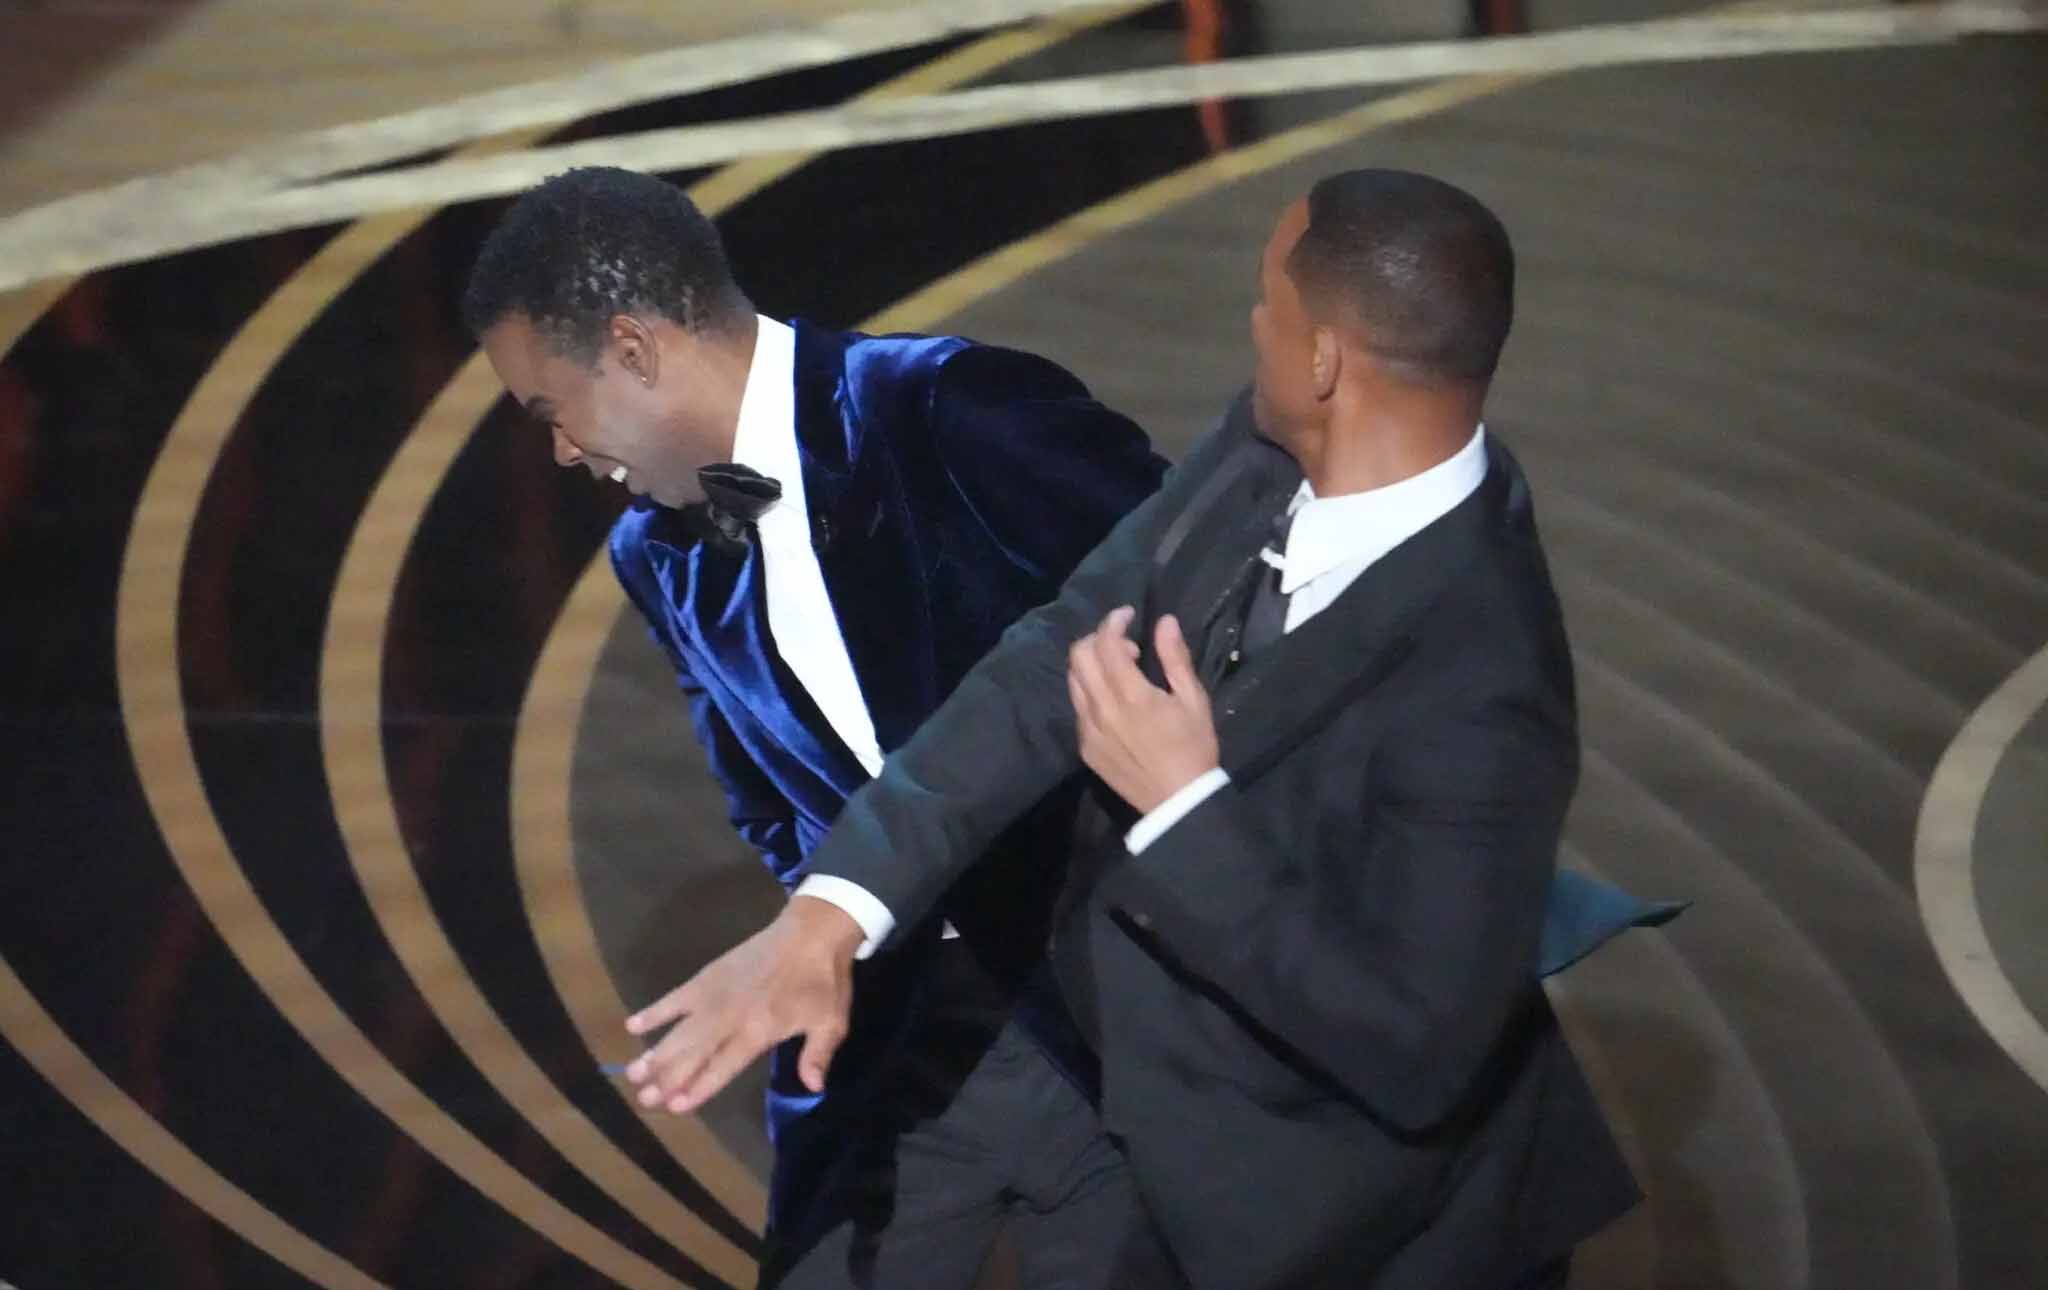 This happened after Will Smith slapped Chris Rock